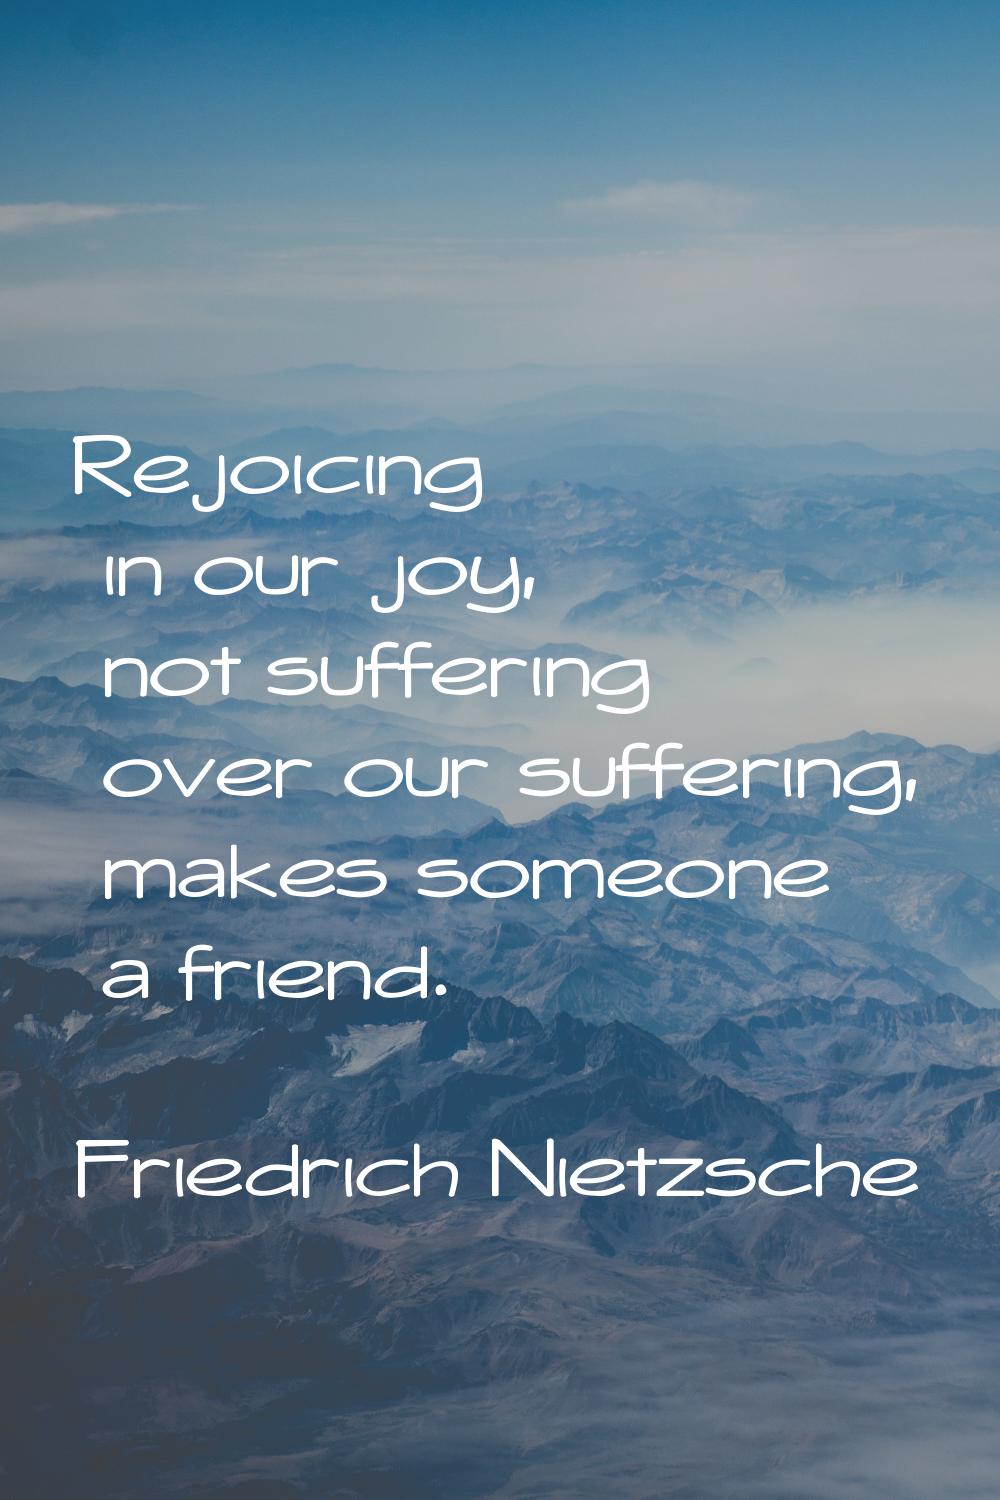 Rejoicing in our joy, not suffering over our suffering, makes someone a friend.